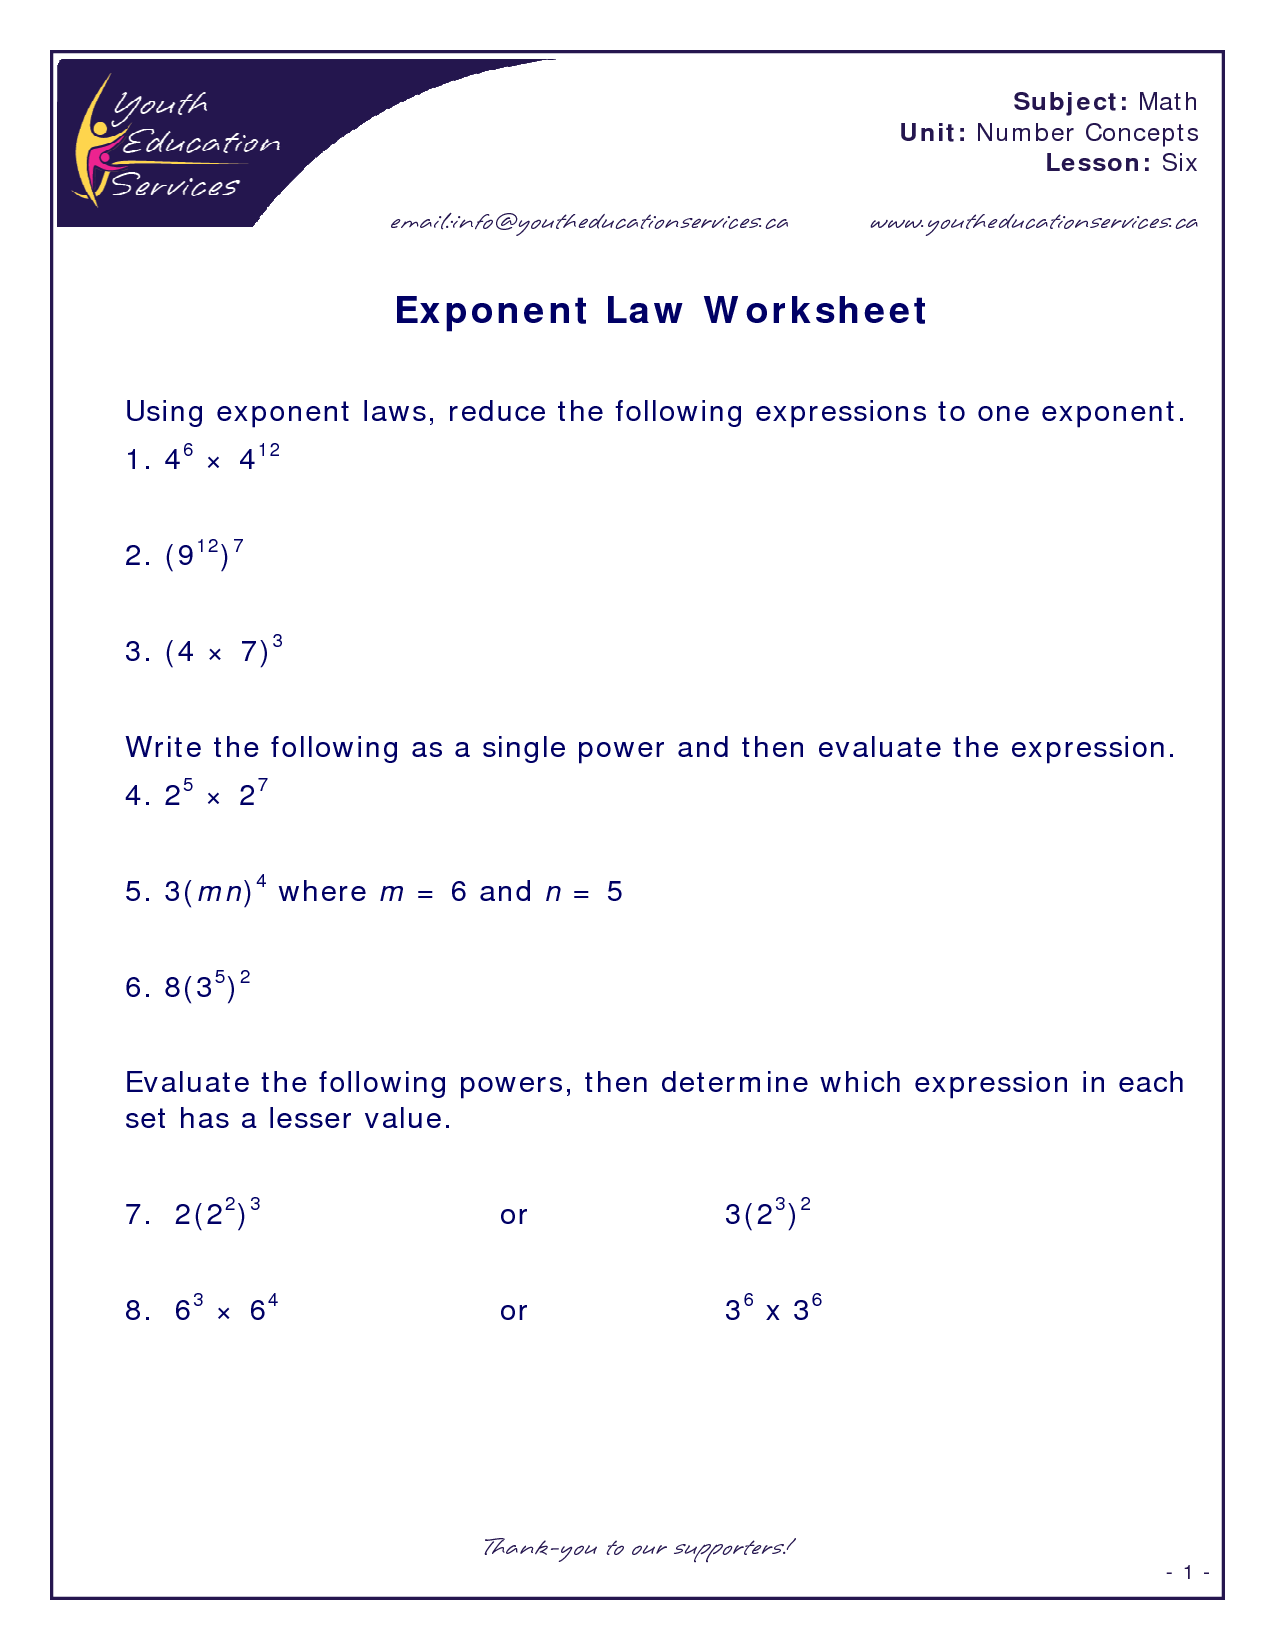 5-best-images-of-printable-exponent-rules-rules-for-exponents-powerchart-exponent-rules-chart